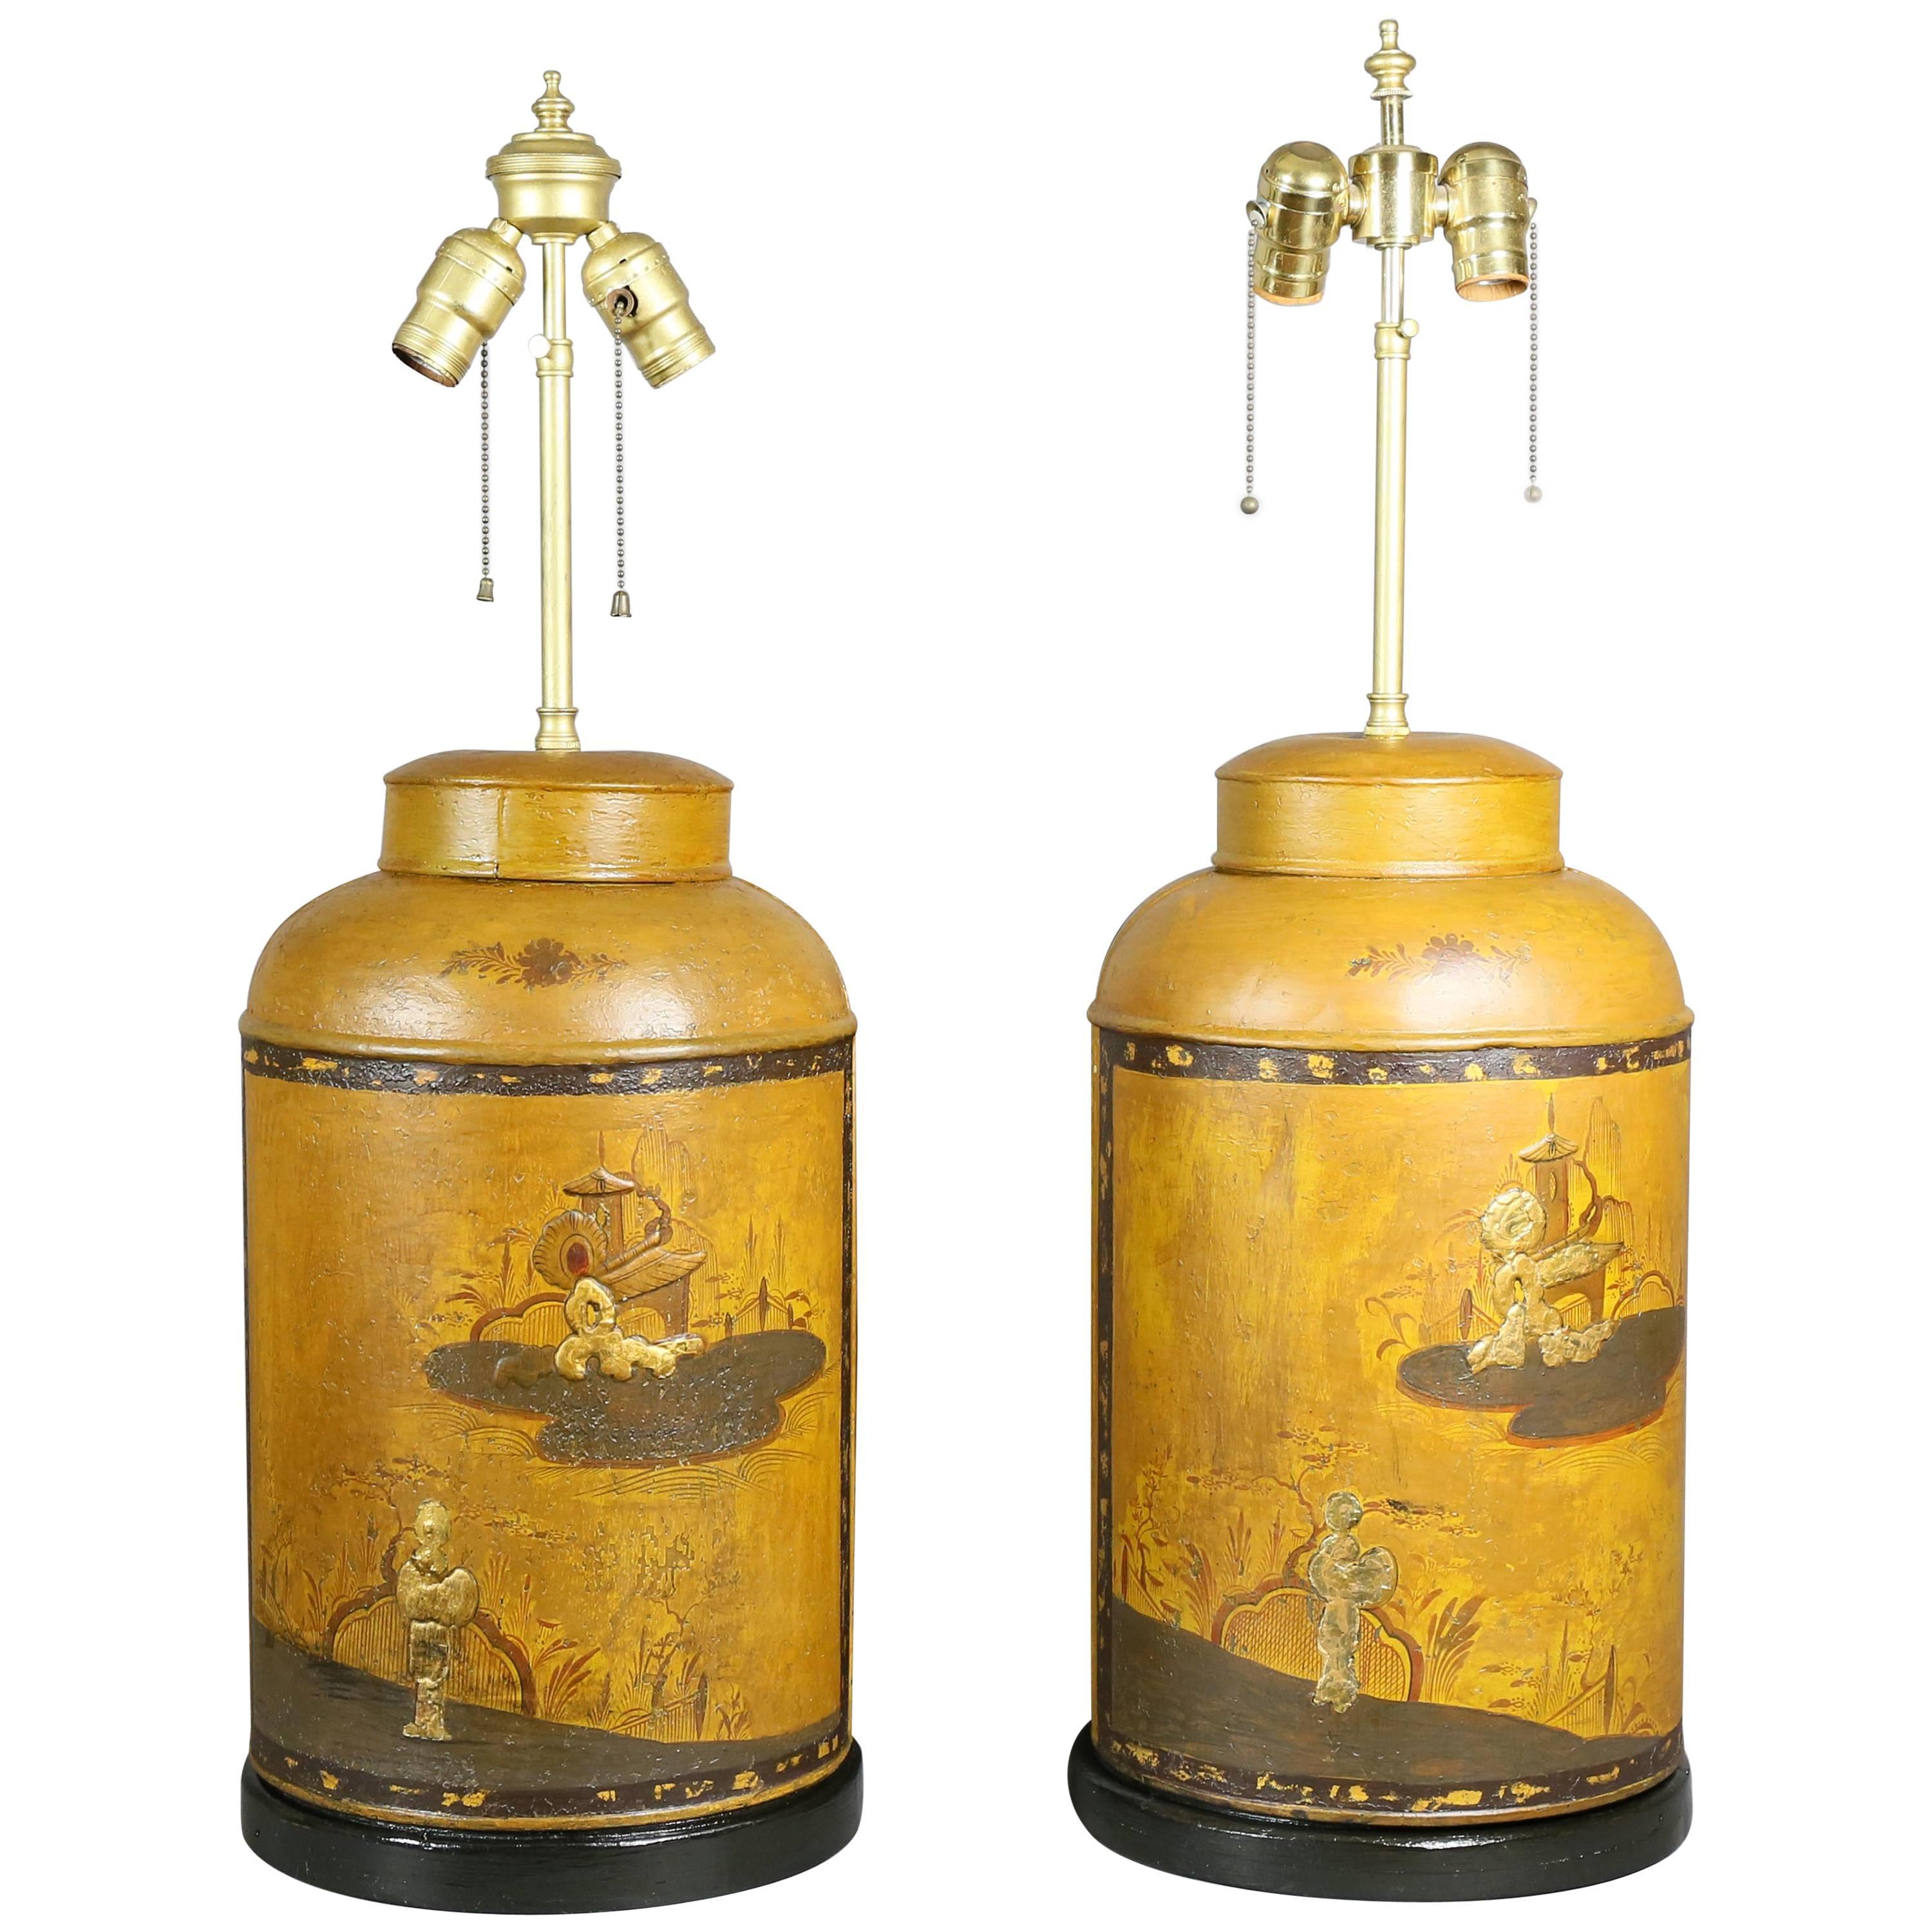 Pair of Victorian Tole Tea Canister Table Lamps